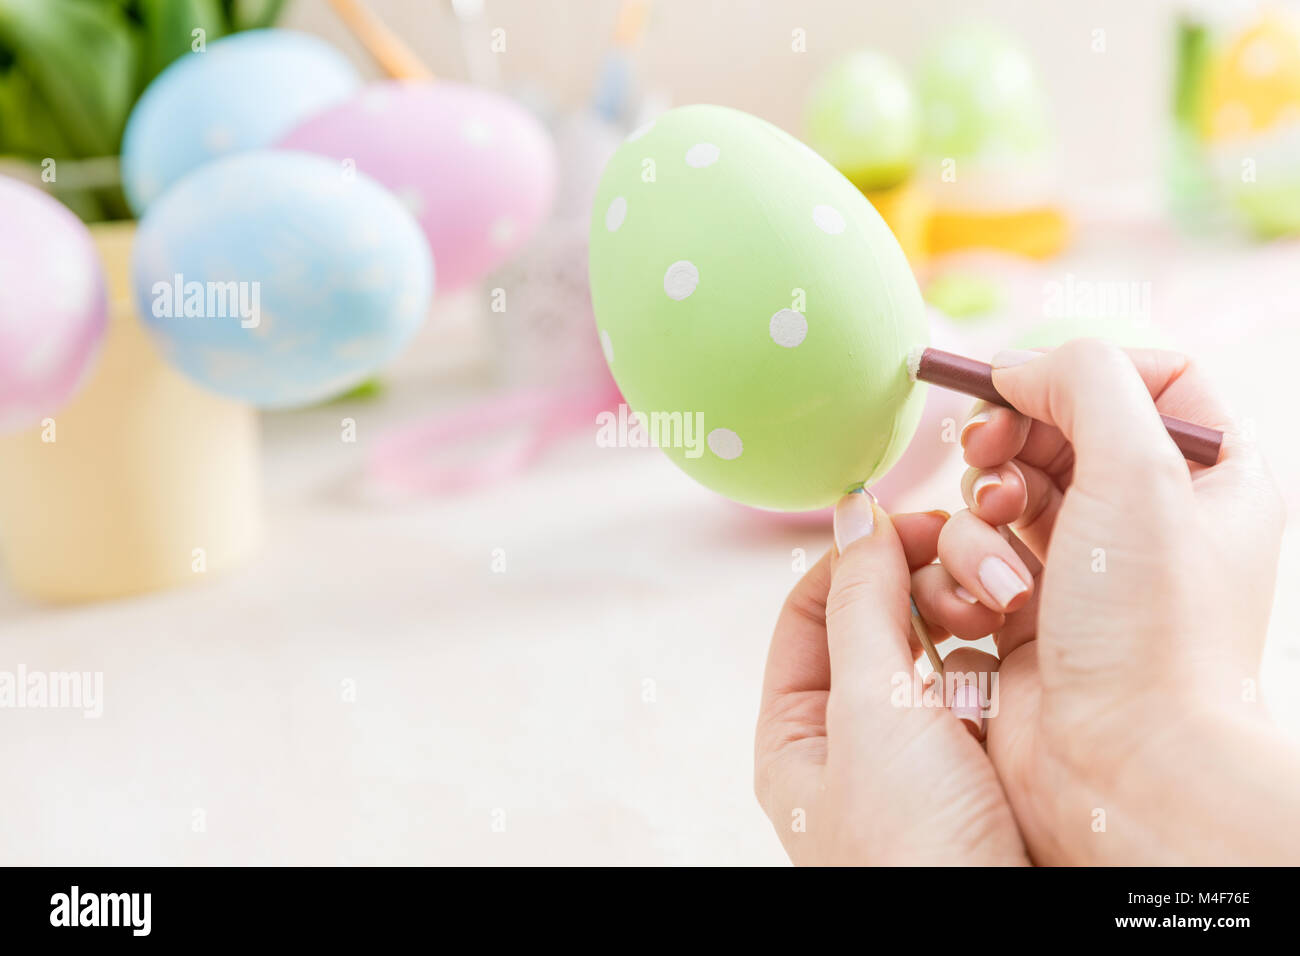 Easter egg handcrafted at home. Stock Photo